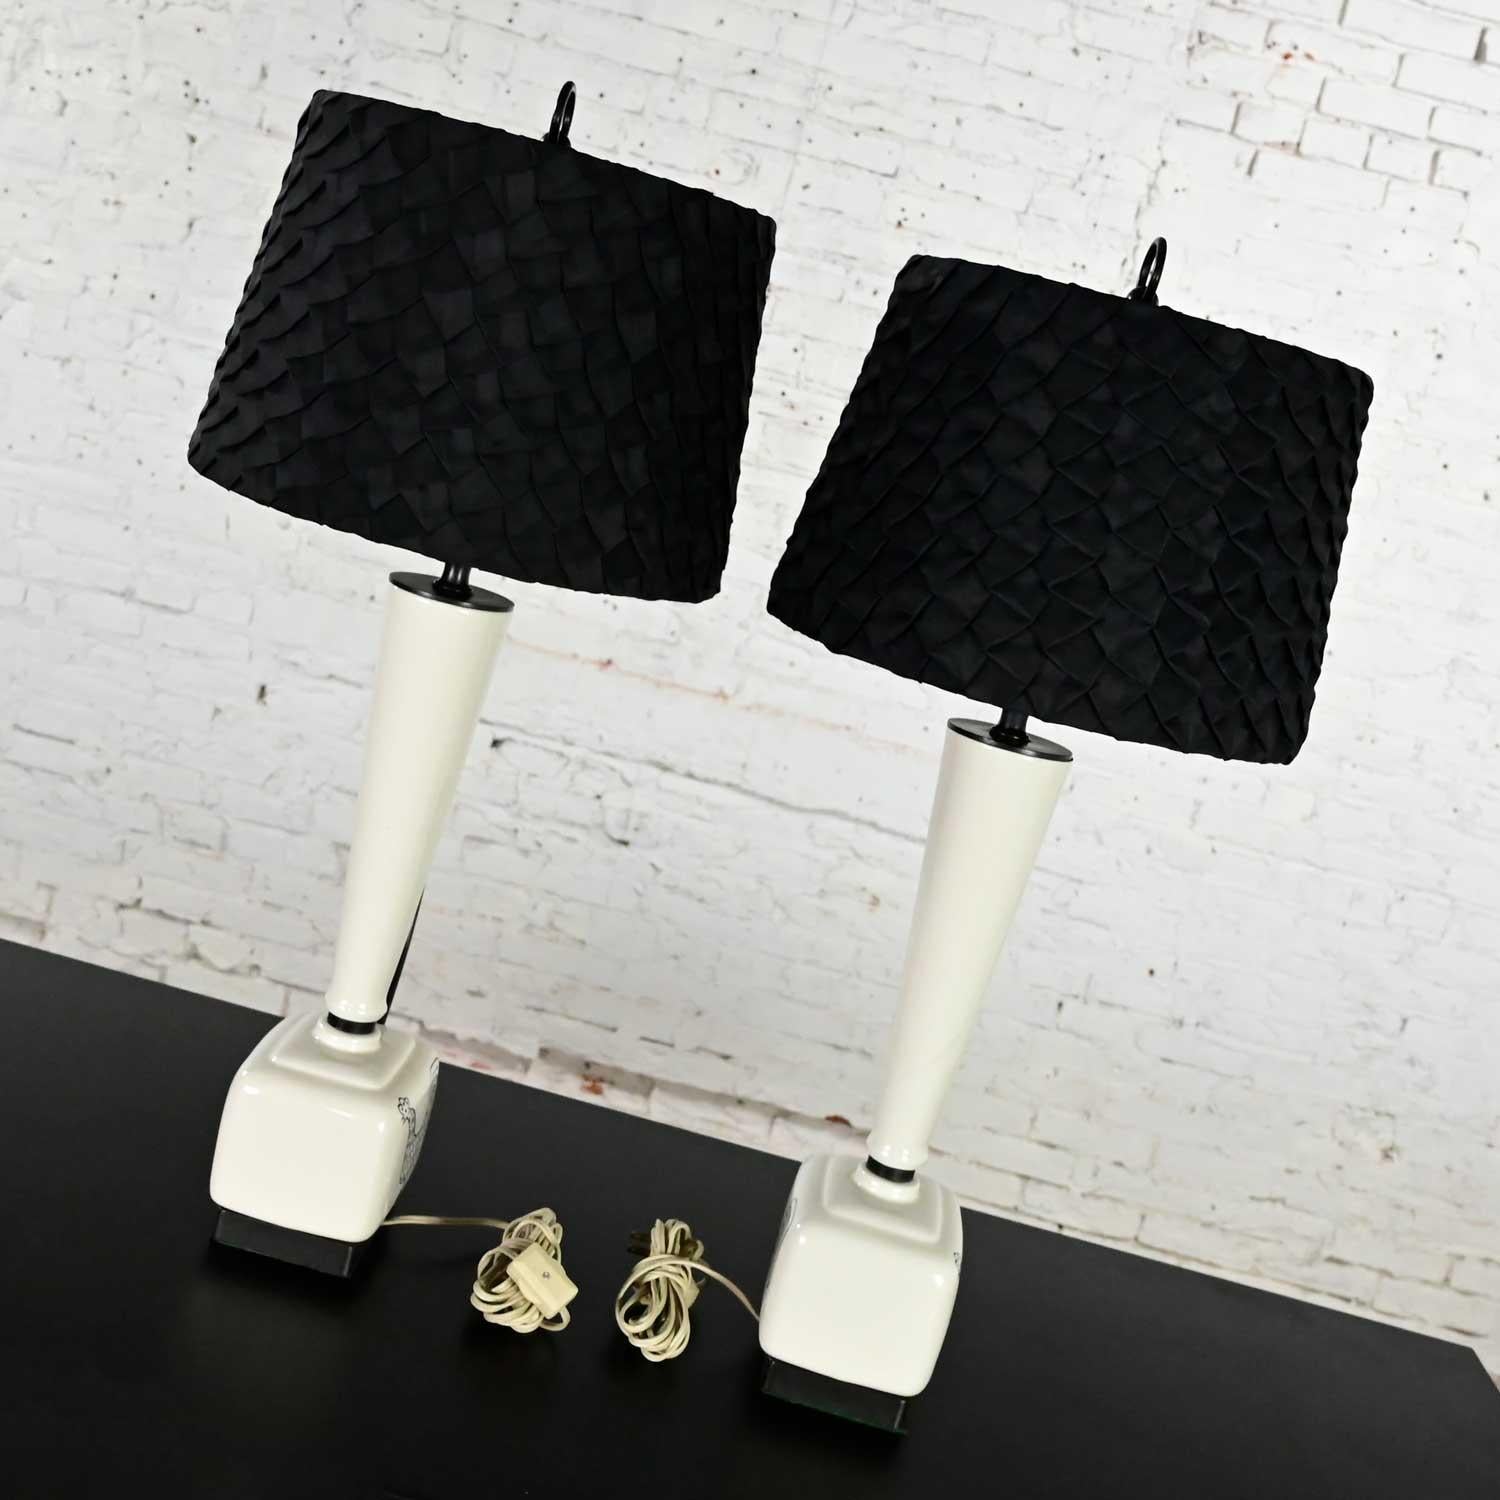 20th Century Mid-Century Modern Black and White Ceramic Lamps w/ Rooster Design, a Pair For Sale